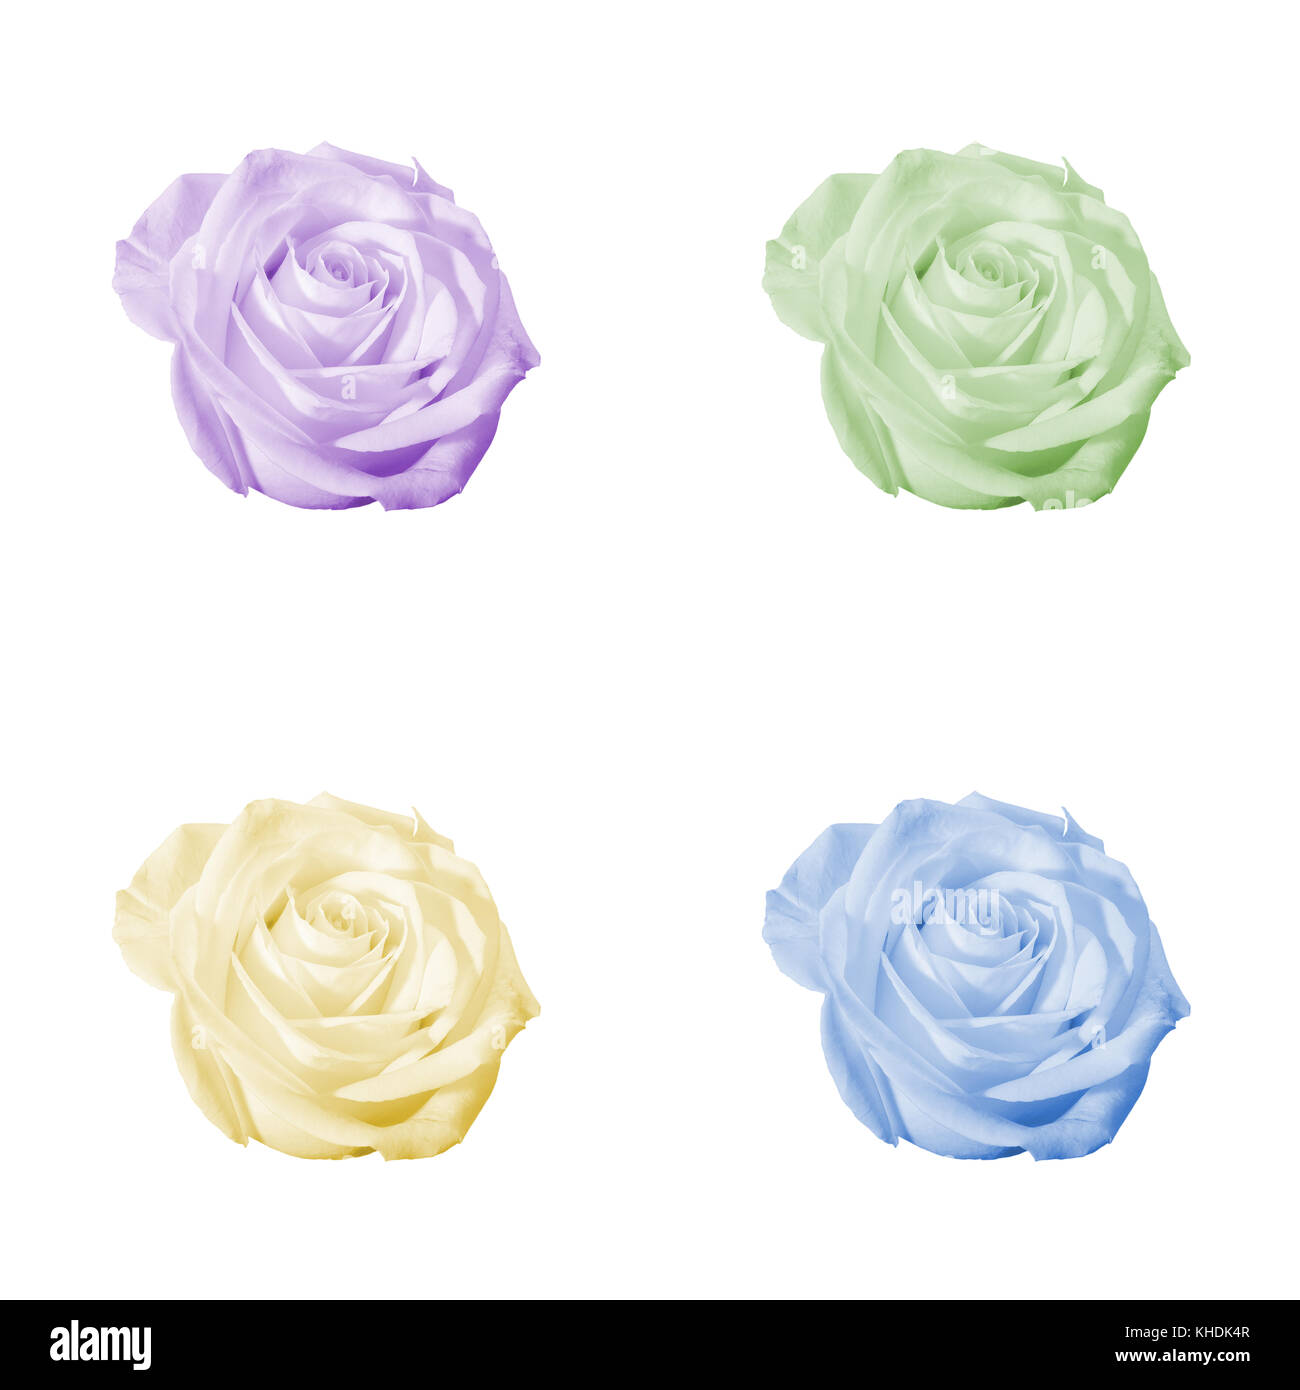 Floral pattern or background: set of four decorative colored (light purple, violet, green, yellow, blue) flowers - roses - closeup (close up) isolated Stock Photo